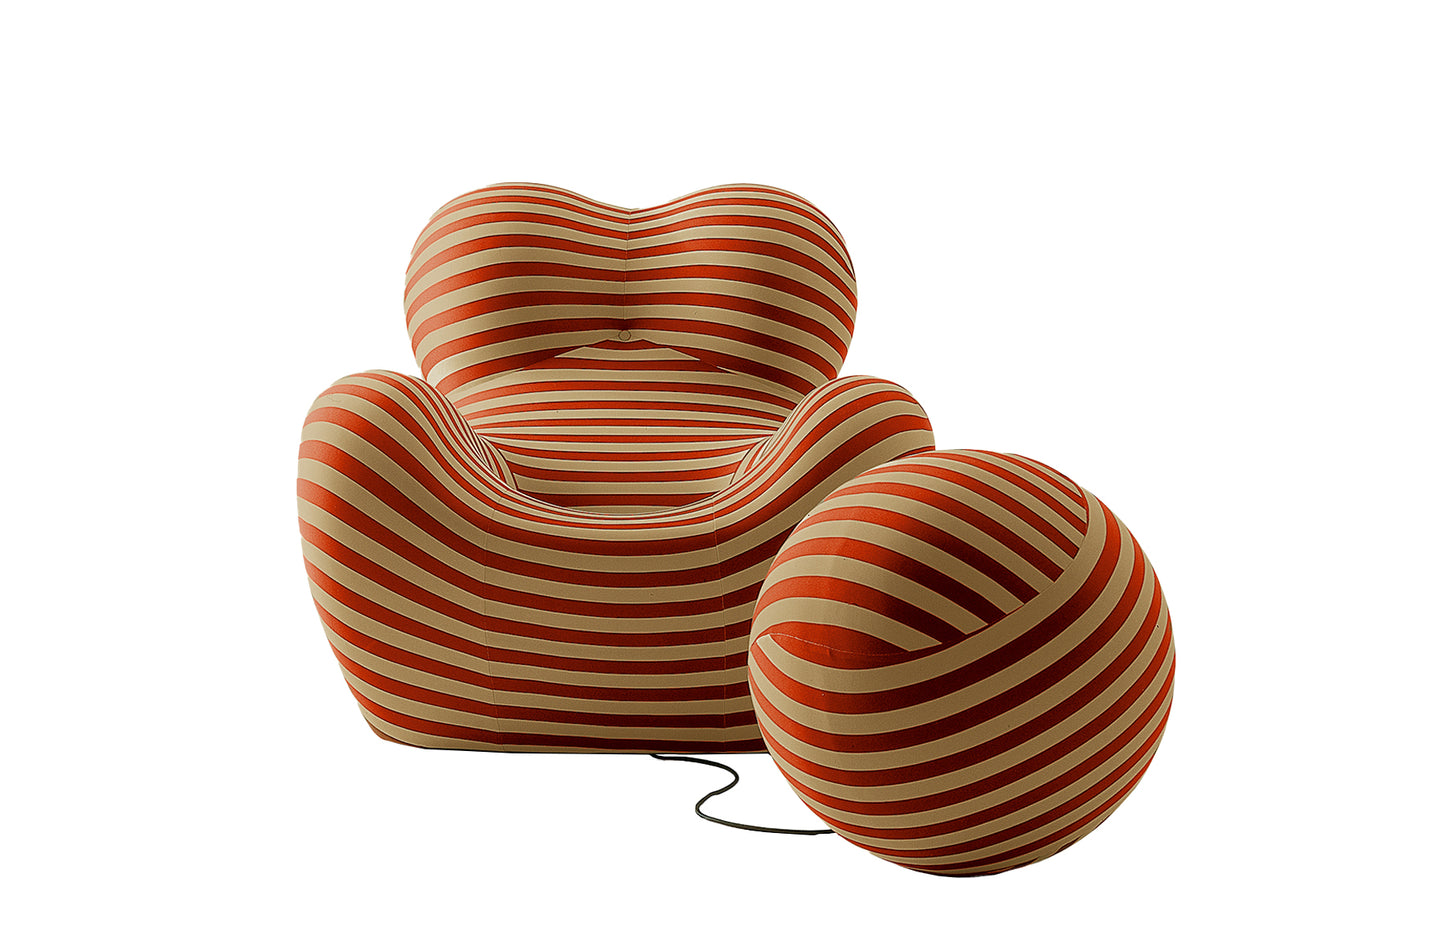 Up Series 2000 UP5_6 Armchair - Striped
